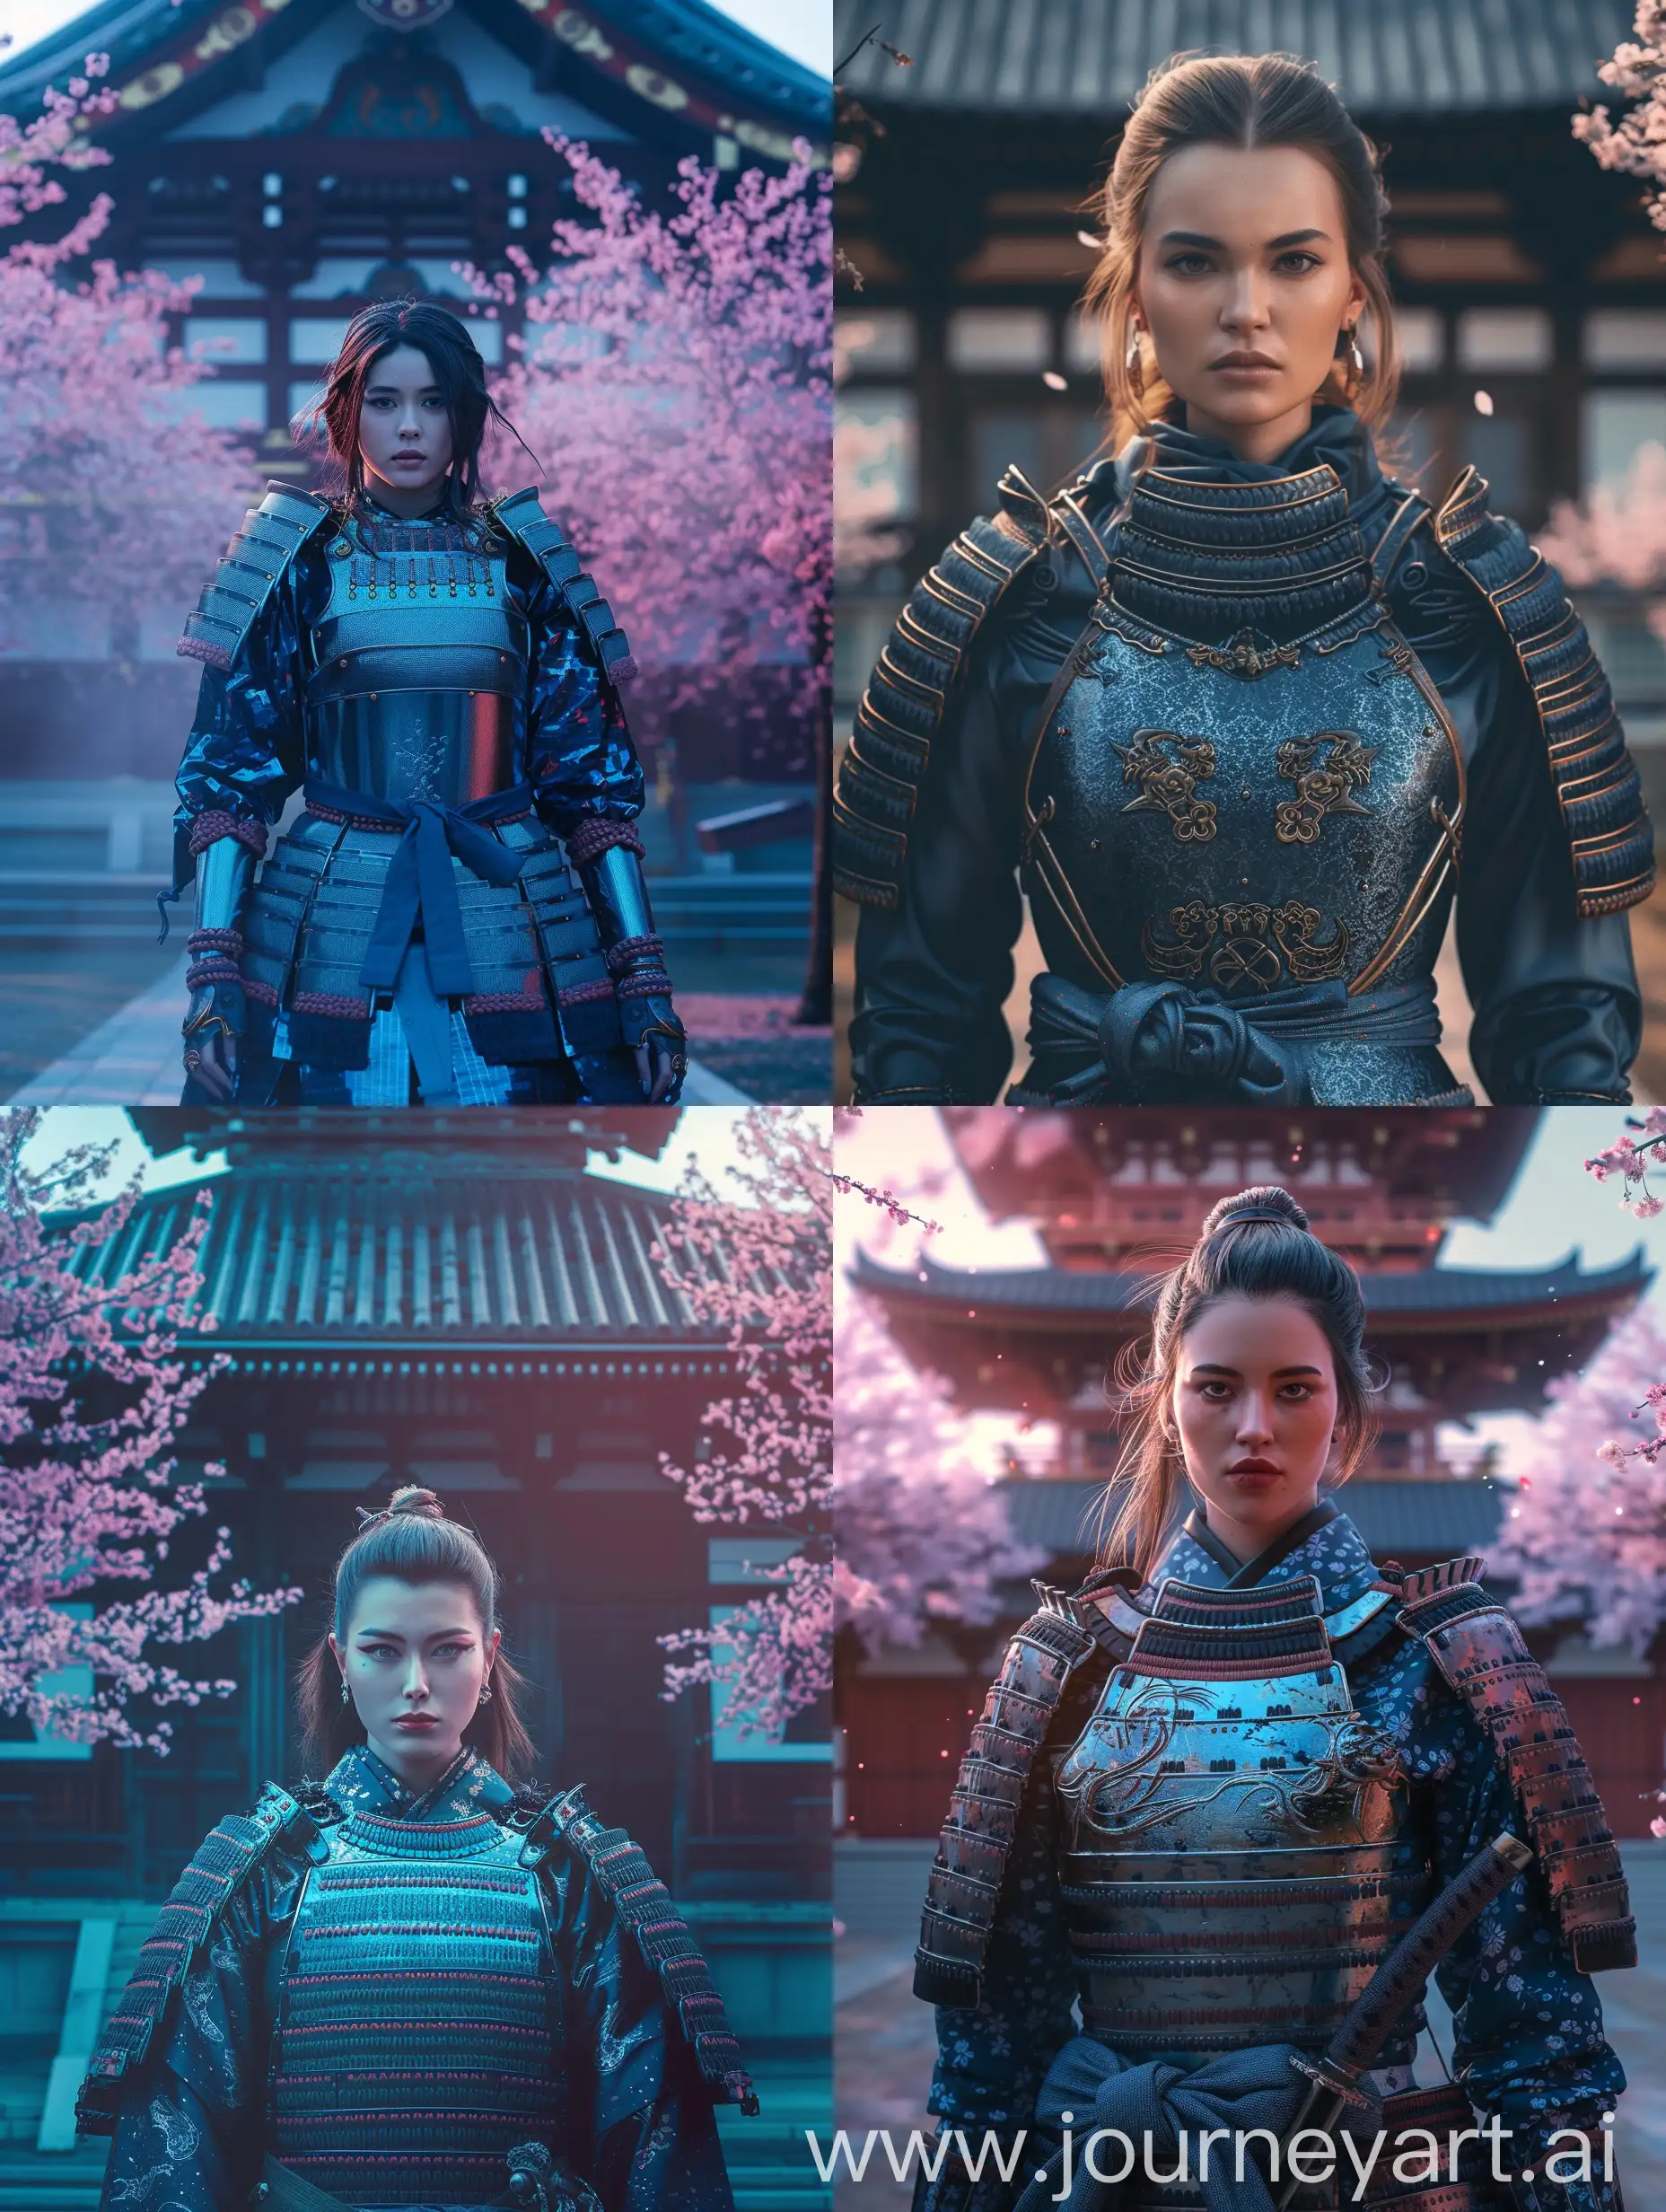 **Character:** A captivating and beautiful female samurai warrior, adorned in a resplendent Blue ō-yoroi armor gleaming with an intense, reflective sheen, exuding elegance and strength.
**Environment:** The majestic setting of a Japanese Temple, steeped in tradition and serenity, with blooming cherry blossom trees adding a touch of pink Studio
**Background:** A Front View of a Symmetrical Japanese Temple, its intricate architecture providing a harmonious backdrop to the scene Studio
**Style:** An opulent Blue ō-yoroi Fashion Editorial, blending the timeless essence of the Samurai with contemporary flair.
**Photography Type:** Cinematic Fashion Editorial, capturing the essence of the Blue ō-yoroi Samurai Warrior in a visually compelling manner.
**Theme:** A Fashion Editorial Campaign celebrating the Blue ō-yoroi Samurai Warrior, showcasing the fusion of tradition and modernity.
**Visual Filters:** Enhanced with a Fashion Film Look-Up Table (LUT), adding depth and richness to the visual narrative.
**Camera Effects:** Enriched with subtle and Camera Haze effects,Cinematic Film Lut
**Time:** Evening imbuing the scene with a serene and enchanting ambiance.
**Resolution:** Captured in High resolution, ensuring every intricate detail is meticulously preserved.
**Key Element:** The Blue ō-yoroi technical textile, a focal point of the ensemble, adorned with exquisite craftsmanship and detailing.
**Details:** Rich and intricate details adorn the technical textile of the Blue ō-yoroi armor, its reflective surface capturing and refracting the surrounding light, enhancing the warrior's presence and adding depth to the visual narrative.